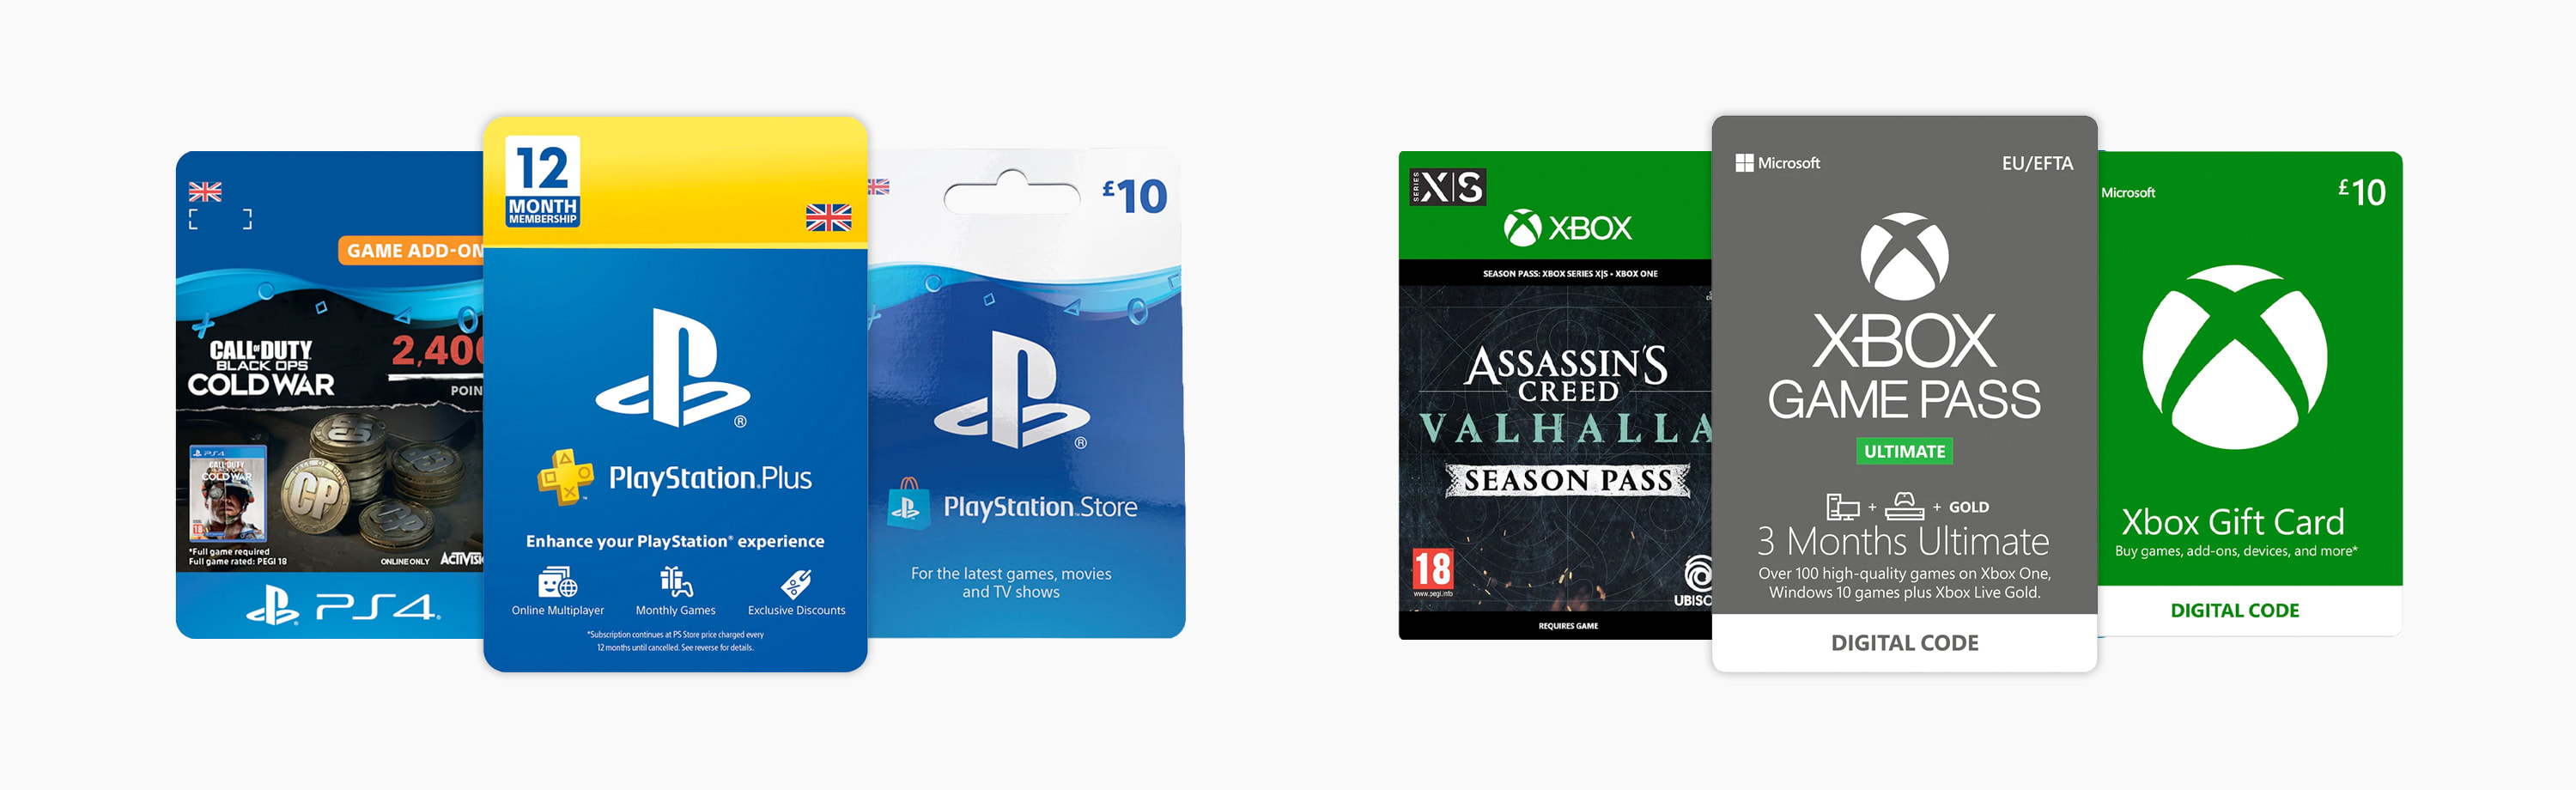 PlayStation and Xbox Digital Credit including PS Plus and Xbox Game Pass